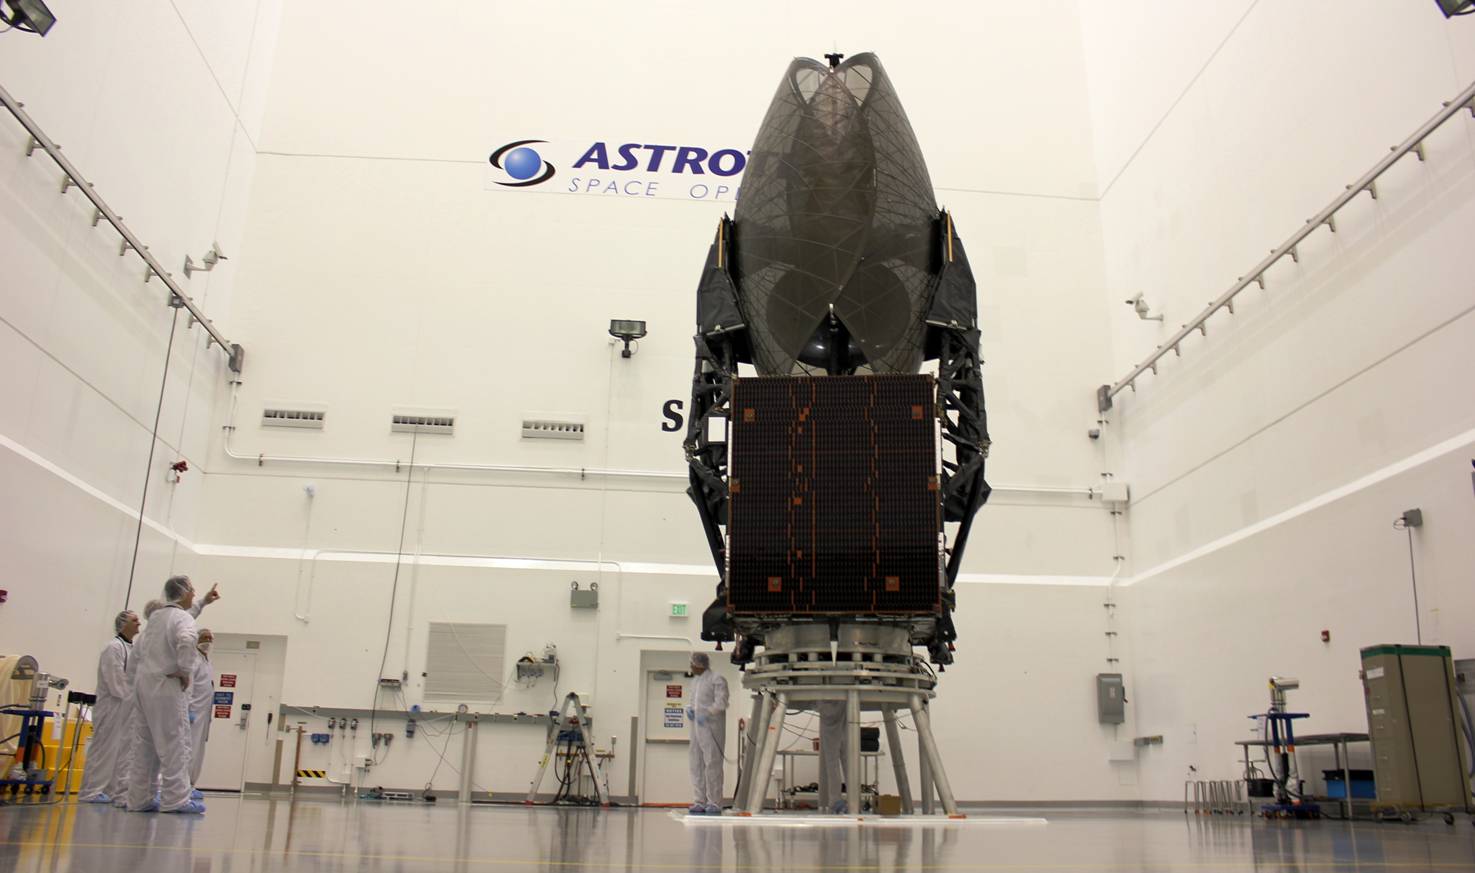 AmericaSpace-image-of-TDRS-K-satellite-at-the-Astrotech-facilities-located-in-Titusville-Florida. photo credit Jason Rhian